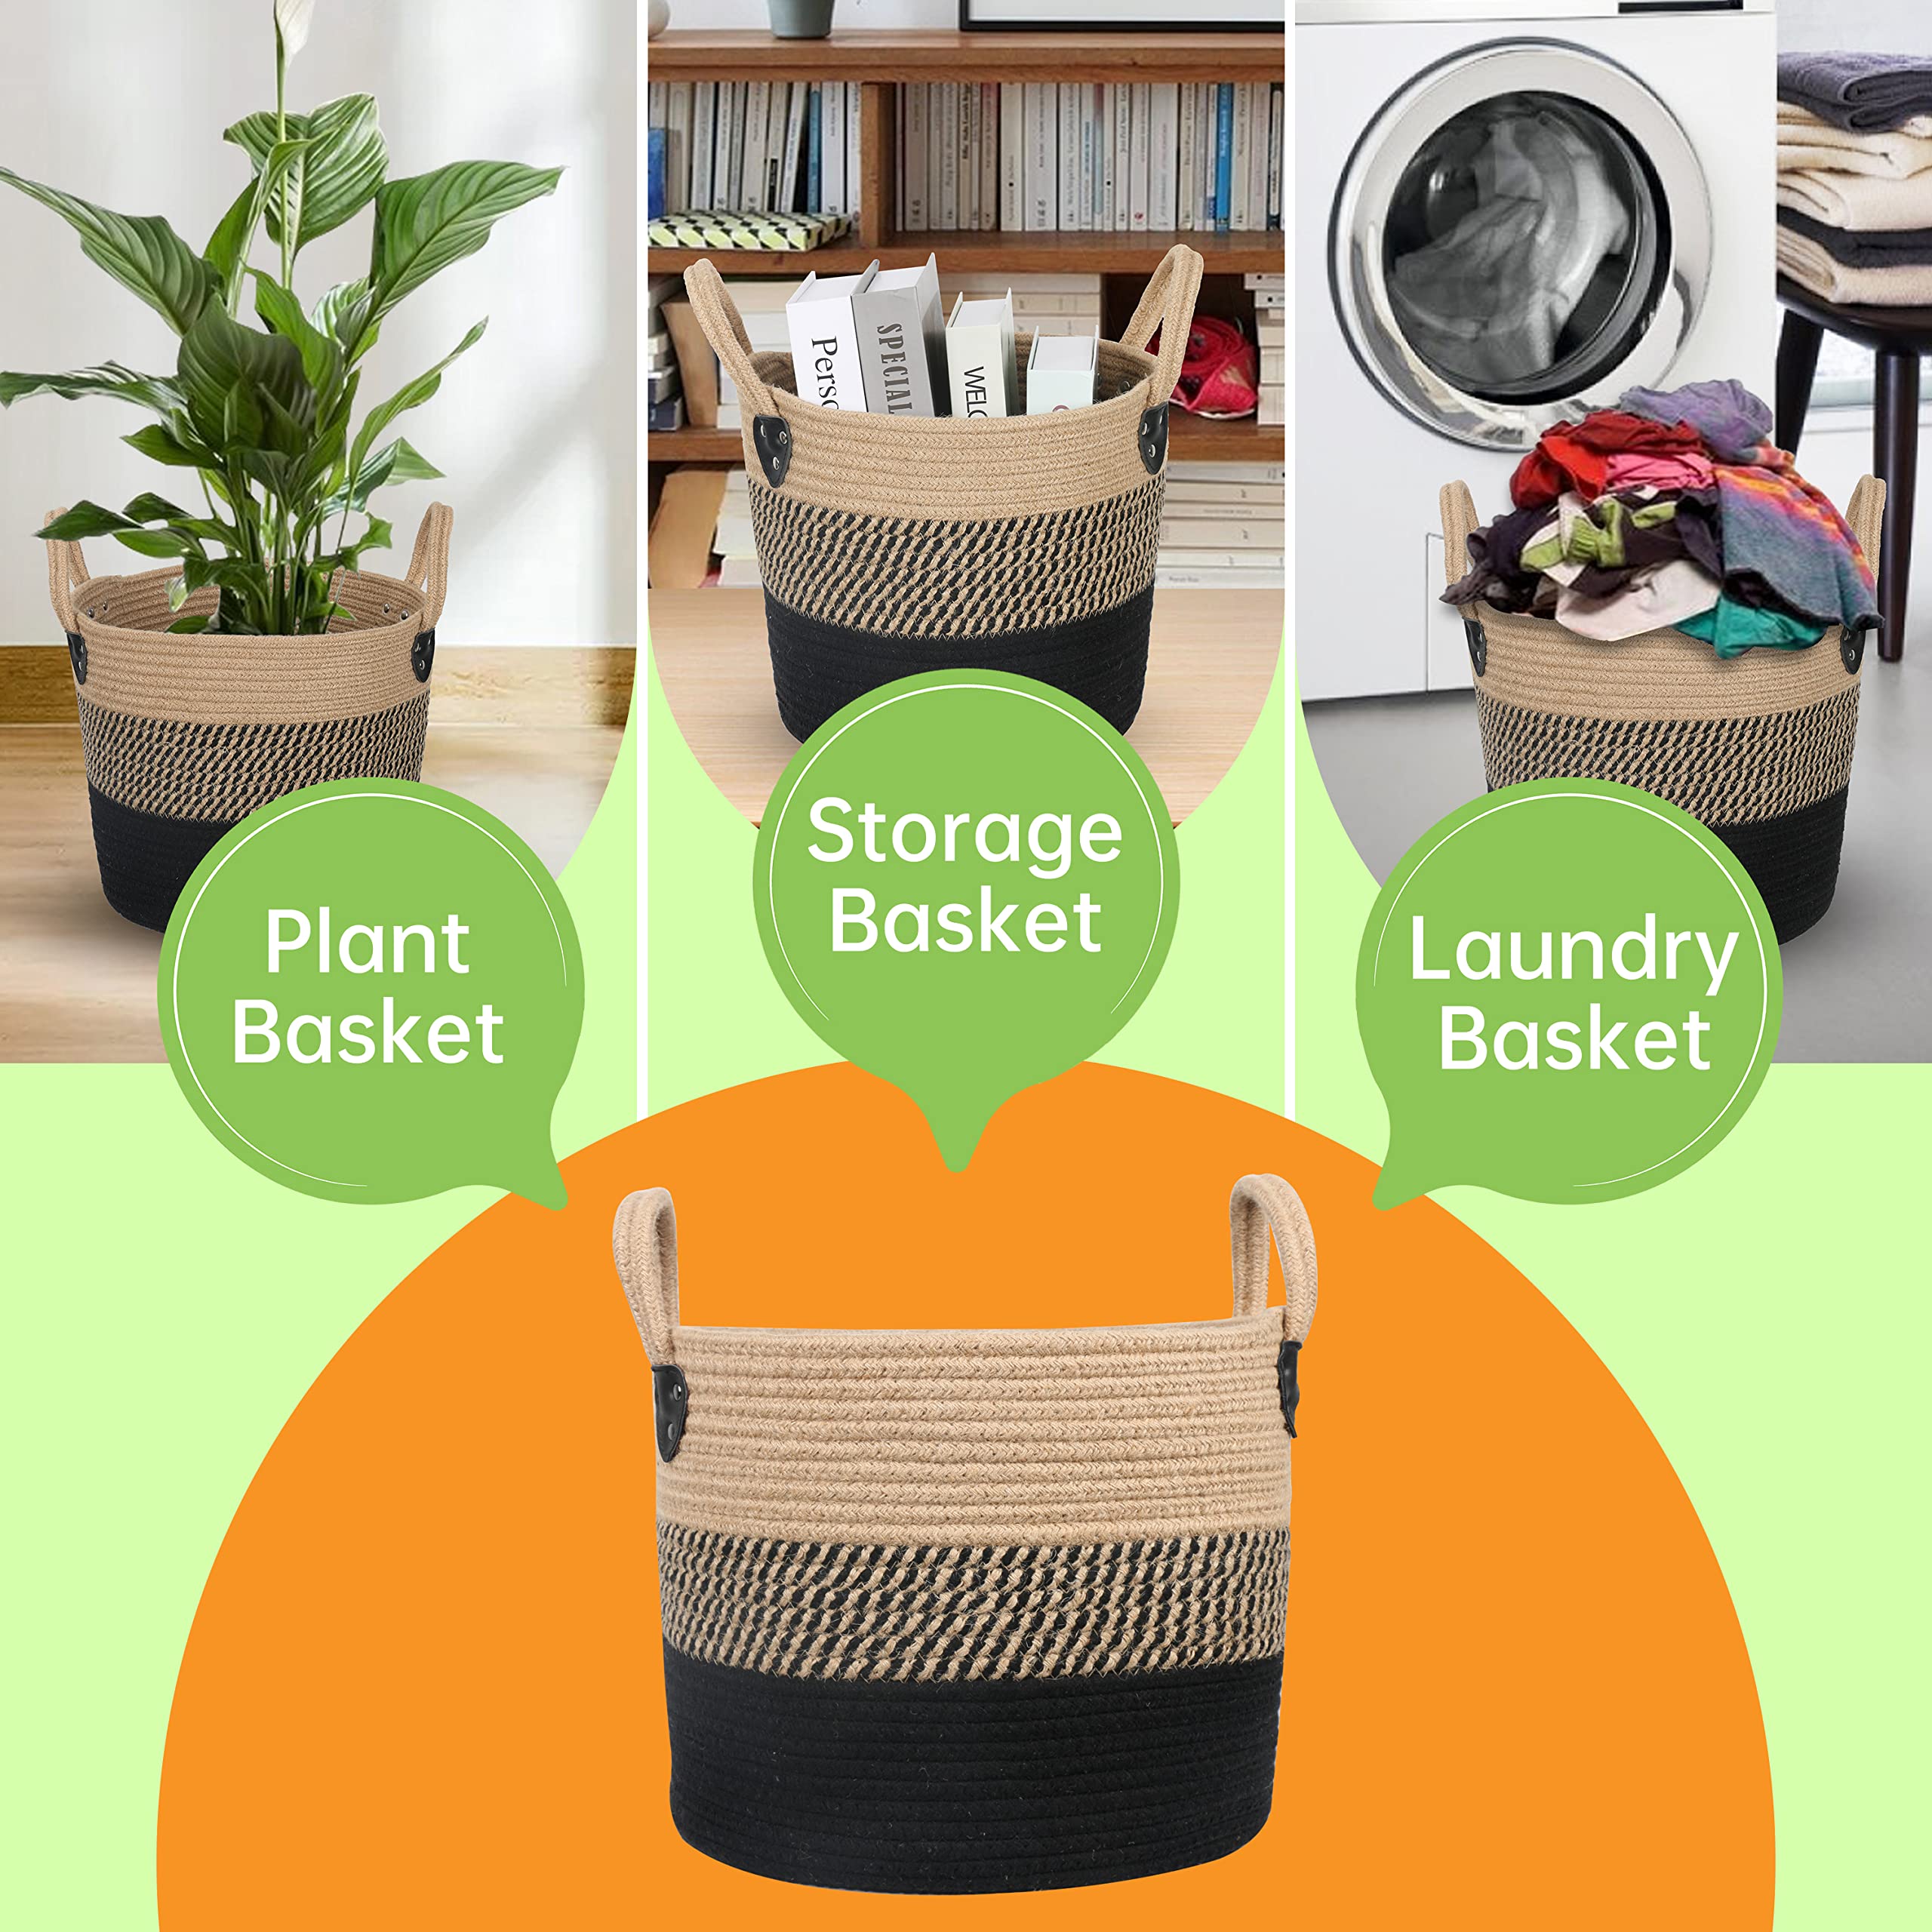 ZOES HOMEWARE 14"x12" Natural Jute Rope Woven Storage Basket with Handles for Plant, Blankets,Toys - Living Room Home Decor,Multifunctional Basket for Organizer,Picnic,Artificial Tree Black and Beige